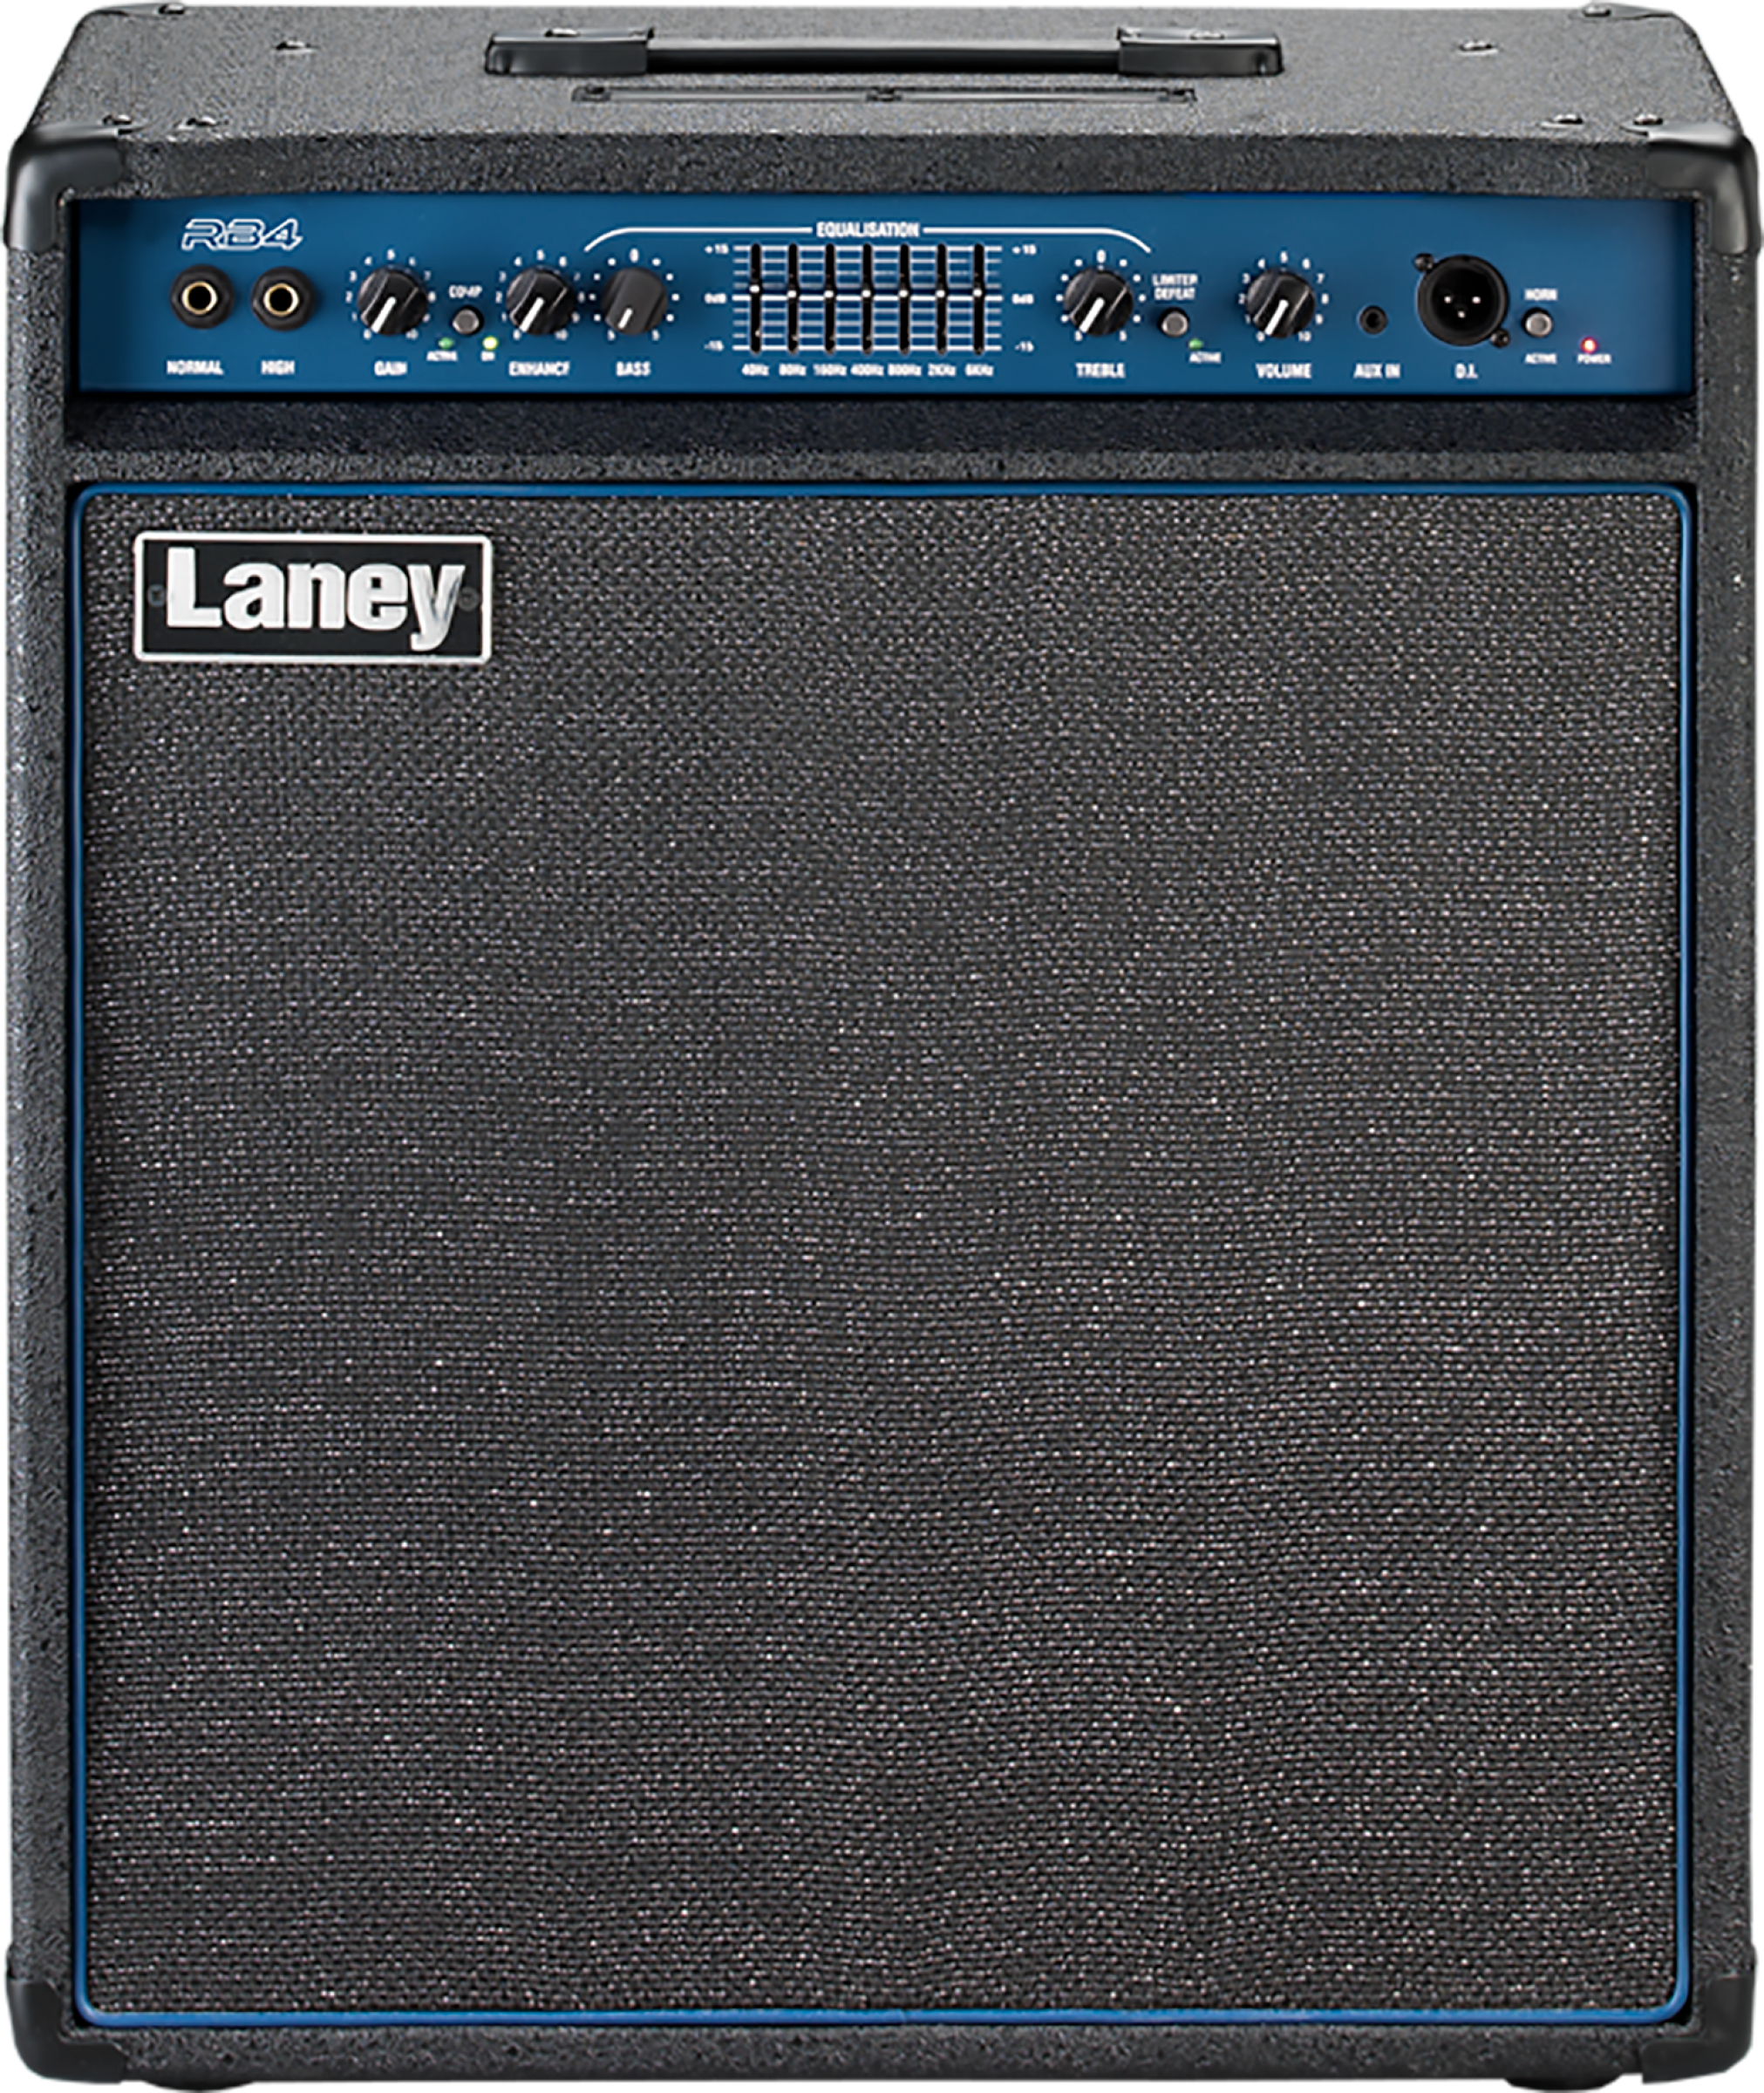 Laney Rb4 165w 1x15 - Bass Combo - Main picture